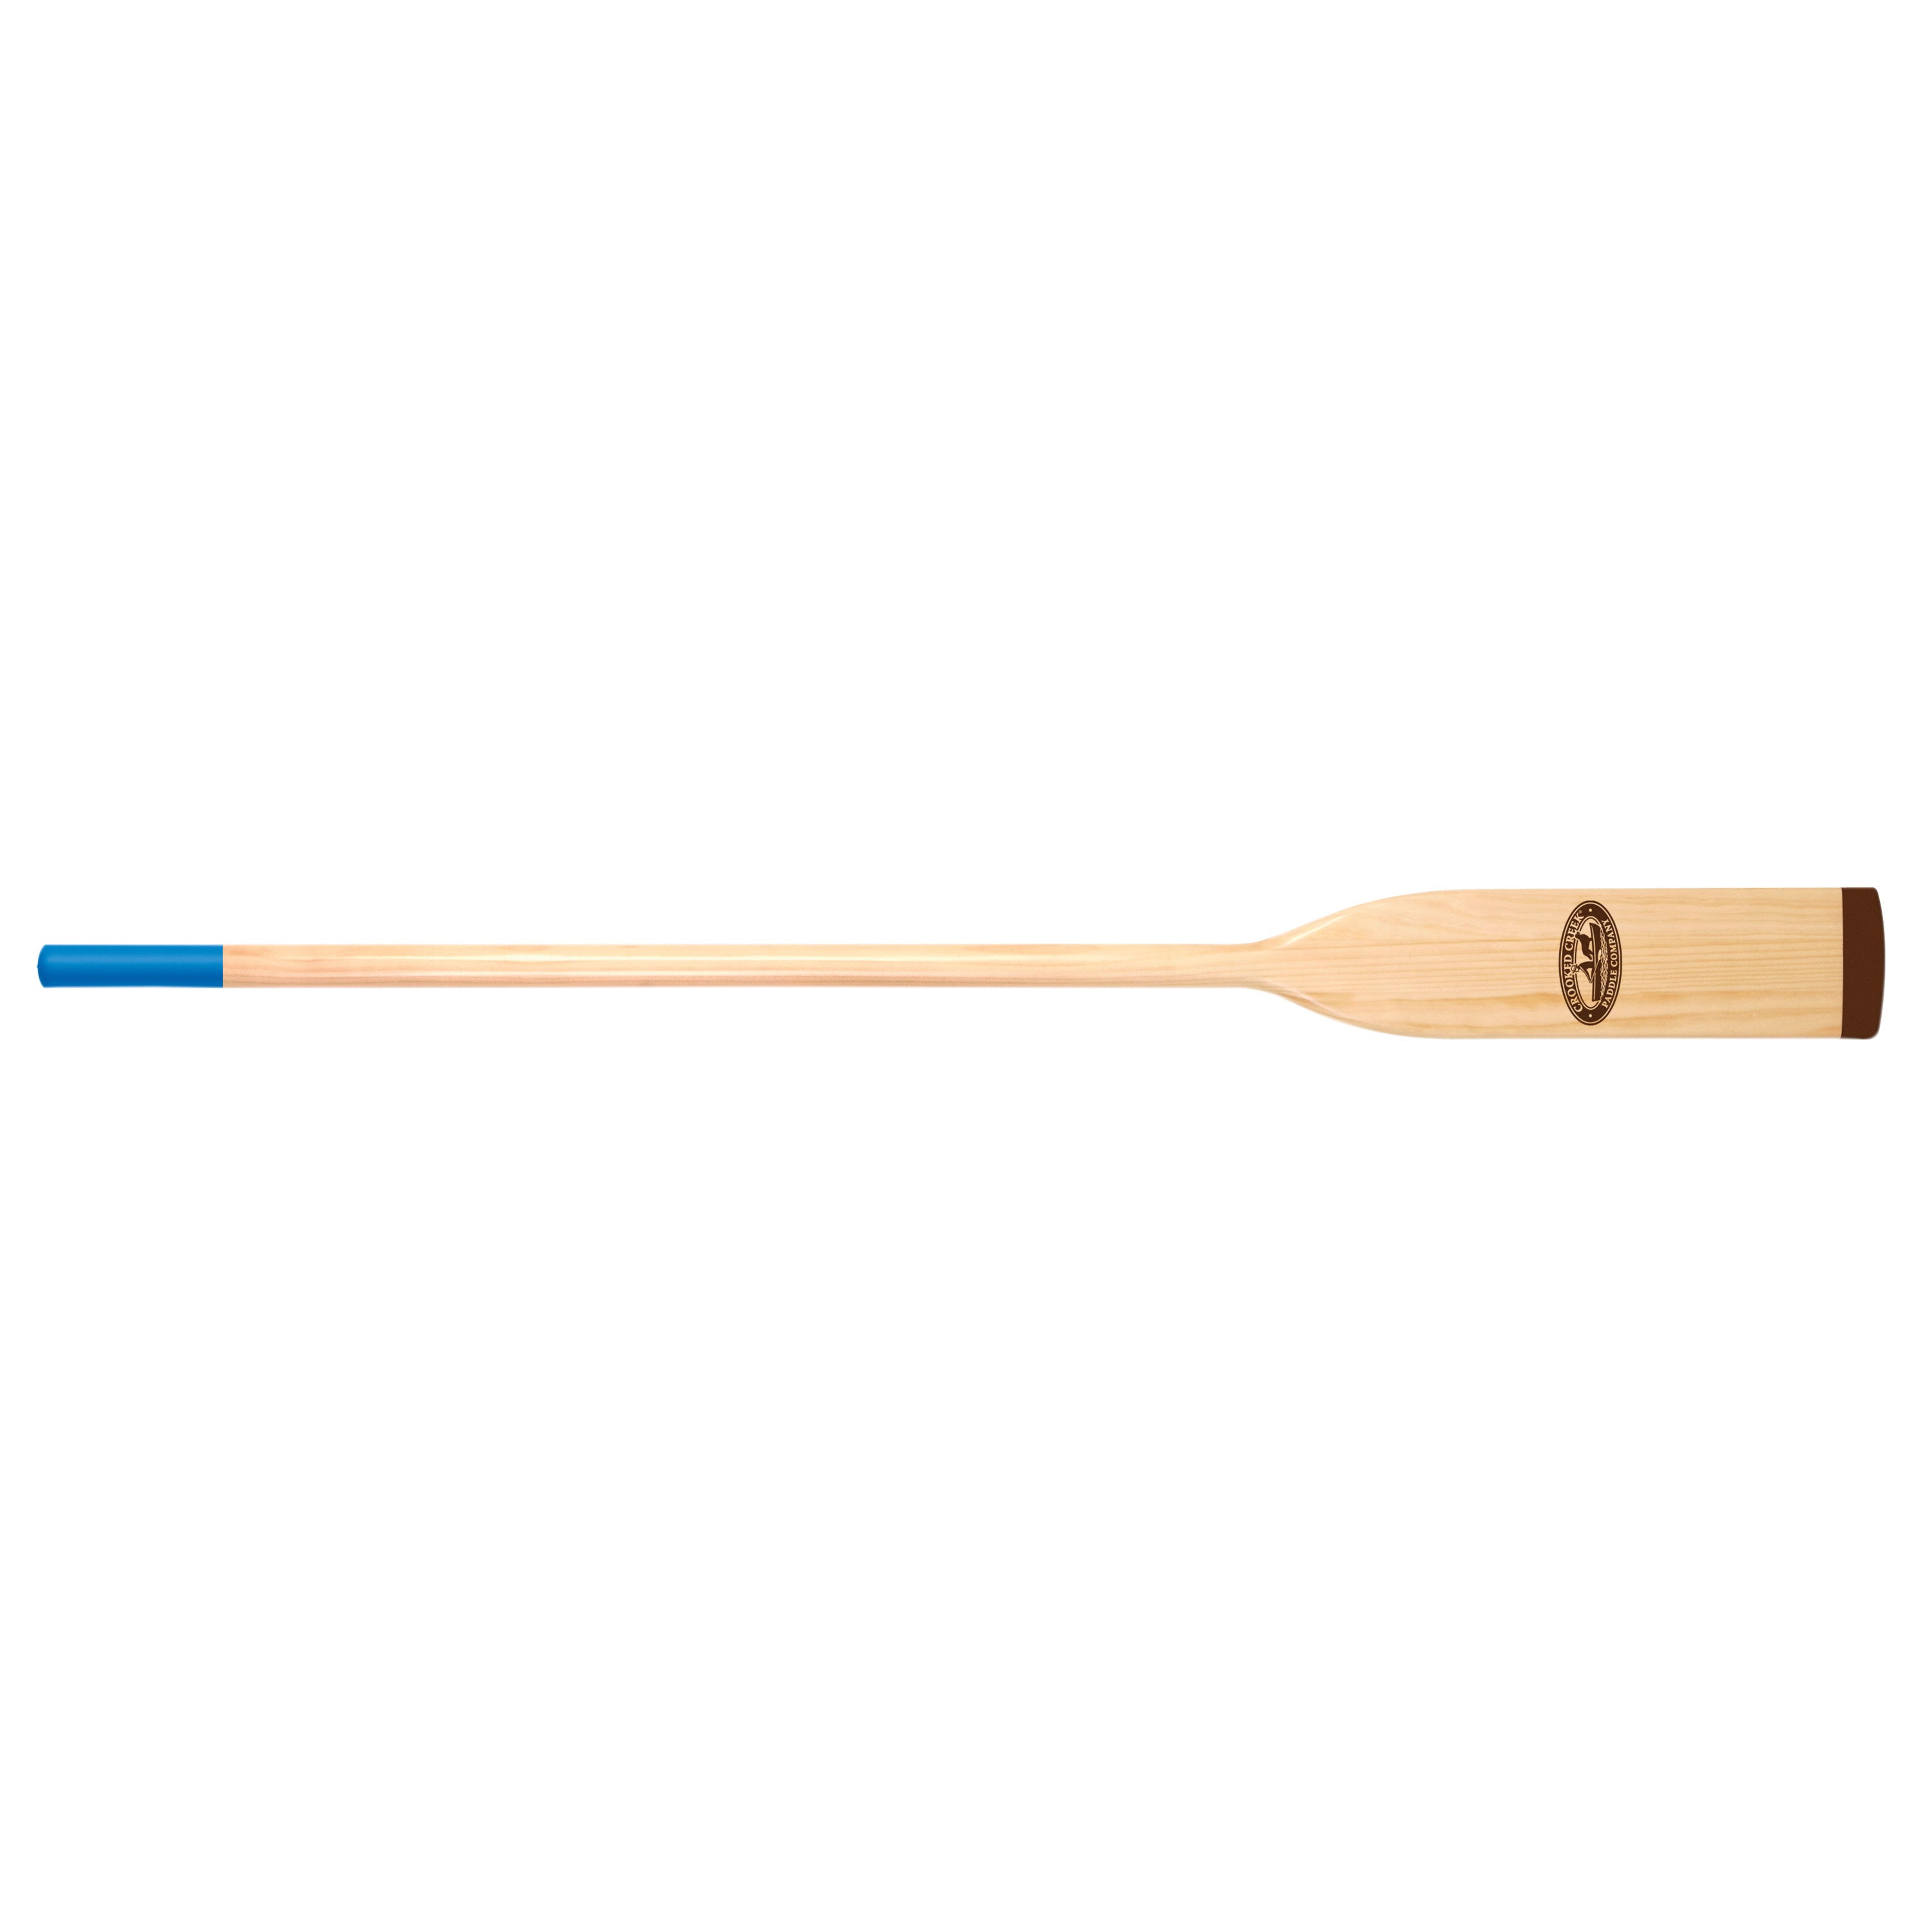 Crooked Creek C10770 Natural Finish Wood Oar with Comfort Grip - 7'